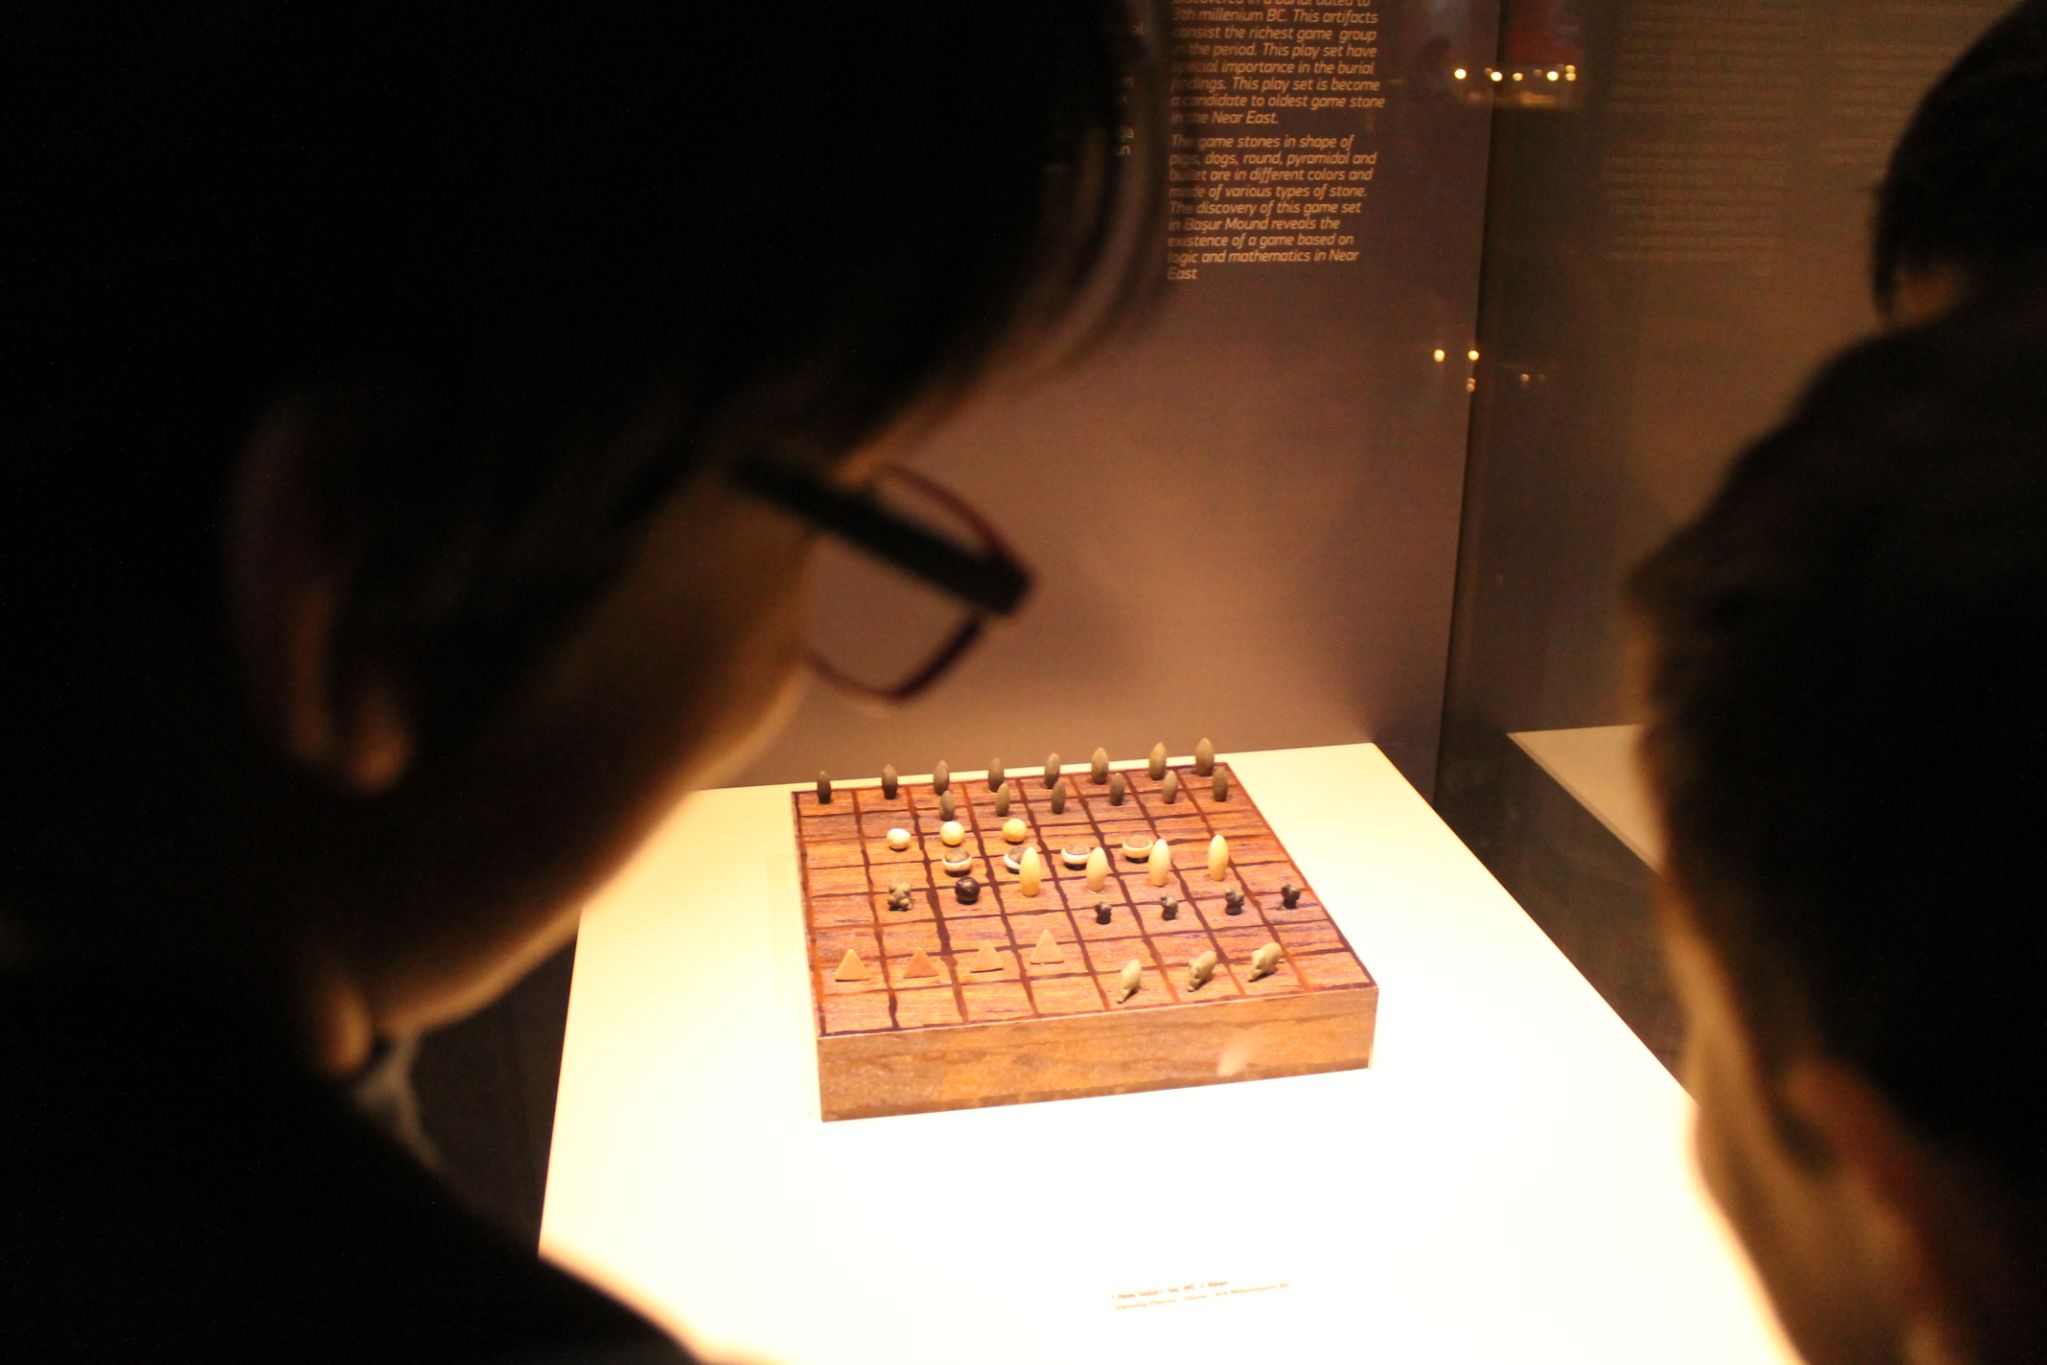 Children on a school trip to the Batman Museum, guess how the game pieces may have been used in play (Nimet Kirac)